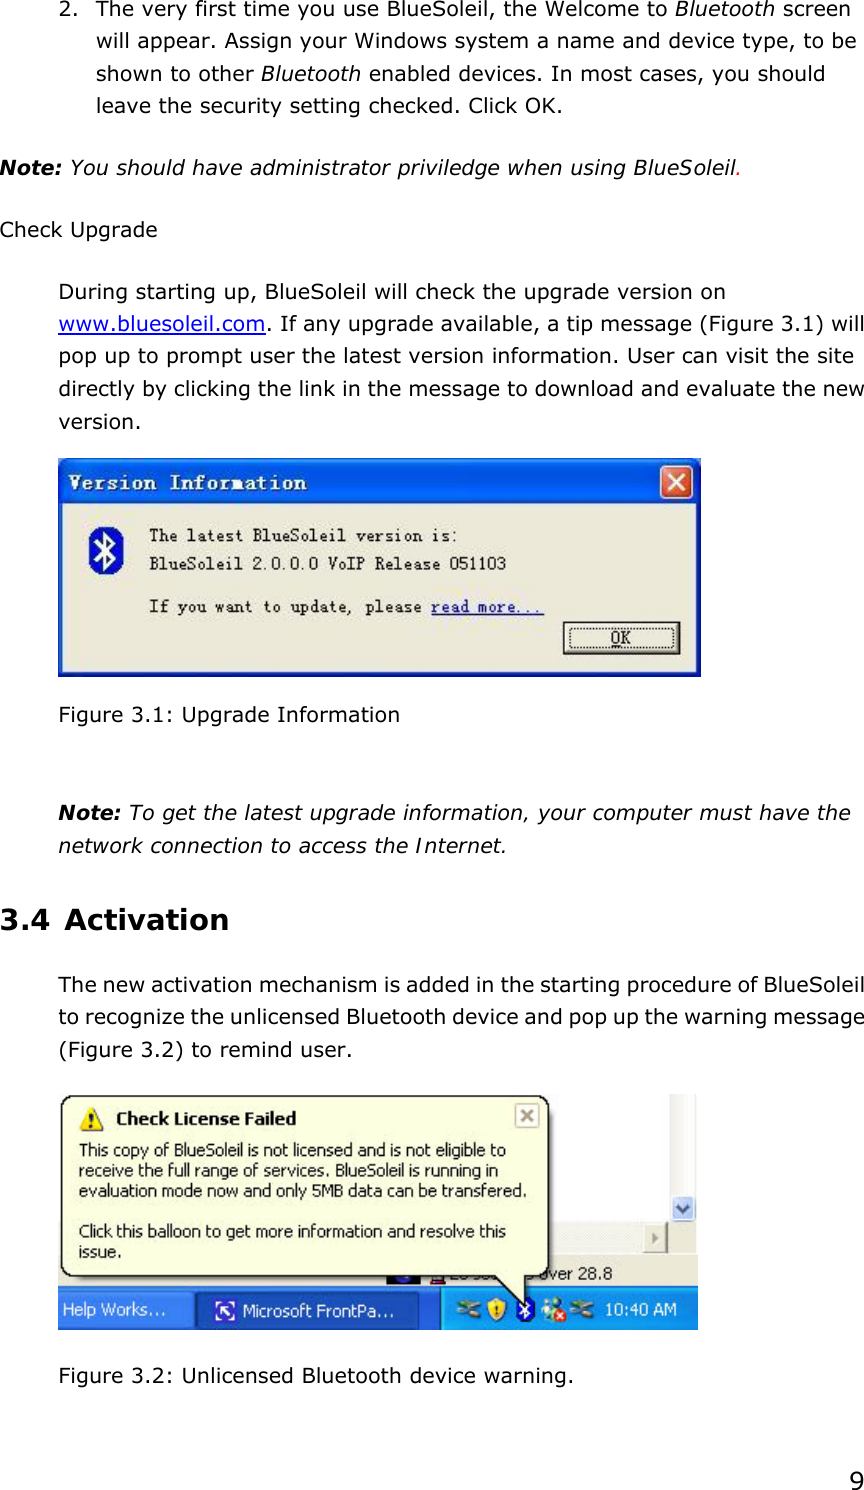  9 2. The very first time you use BlueSoleil, the Welcome to Bluetooth screen will appear. Assign your Windows system a name and device type, to be shown to other Bluetooth enabled devices. In most cases, you should leave the security setting checked. Click OK. Note: You should have administrator priviledge when using BlueSoleil. Check Upgrade During starting up, BlueSoleil will check the upgrade version on www.bluesoleil.com. If any upgrade available, a tip message (Figure 3.1) will pop up to prompt user the latest version information. User can visit the site directly by clicking the link in the message to download and evaluate the new version.  Figure 3.1: Upgrade Information   Note: To get the latest upgrade information, your computer must have the network connection to access the Internet. 3.4 Activation The new activation mechanism is added in the starting procedure of BlueSoleil to recognize the unlicensed Bluetooth device and pop up the warning message (Figure 3.2) to remind user.  Figure 3.2: Unlicensed Bluetooth device warning. 